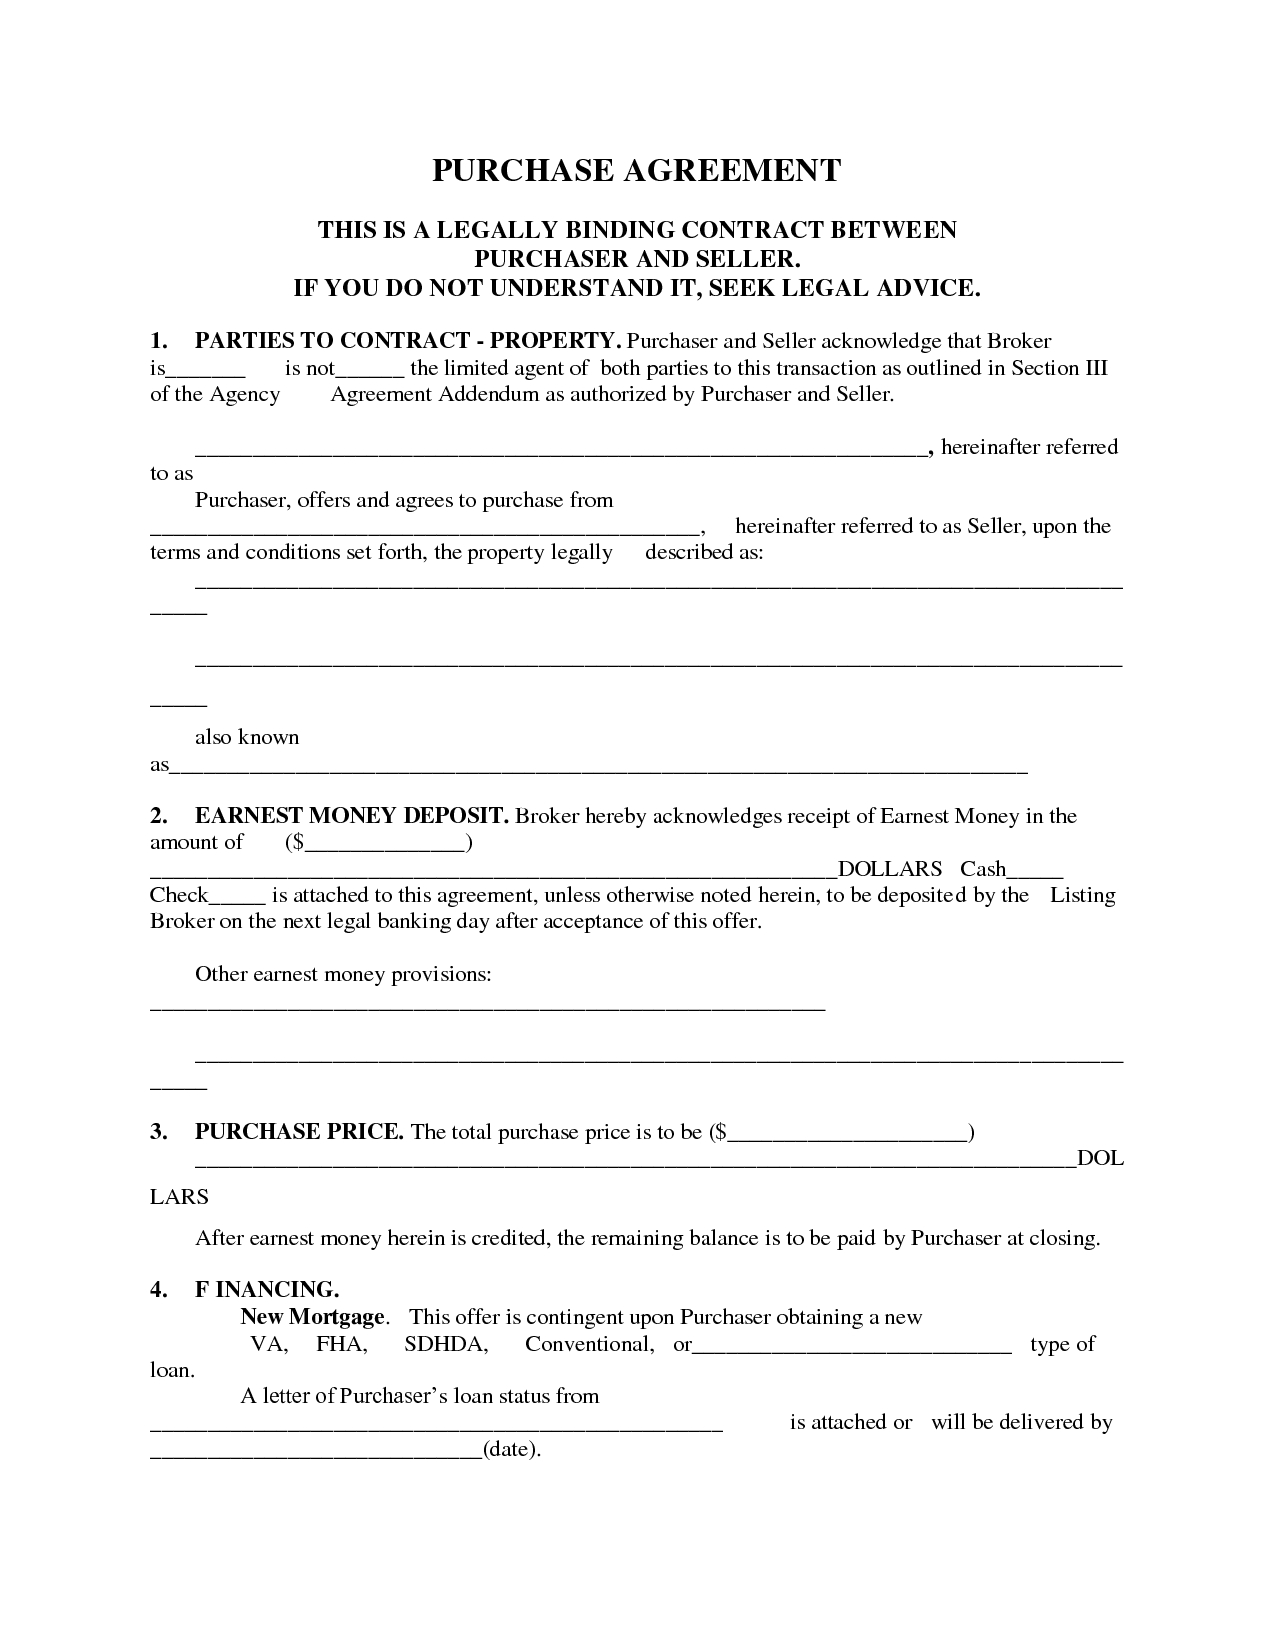 Real Estate Purchase Agreement Form 004 Real Estate Purchase Agreement Template Ideas Best Form Ohio